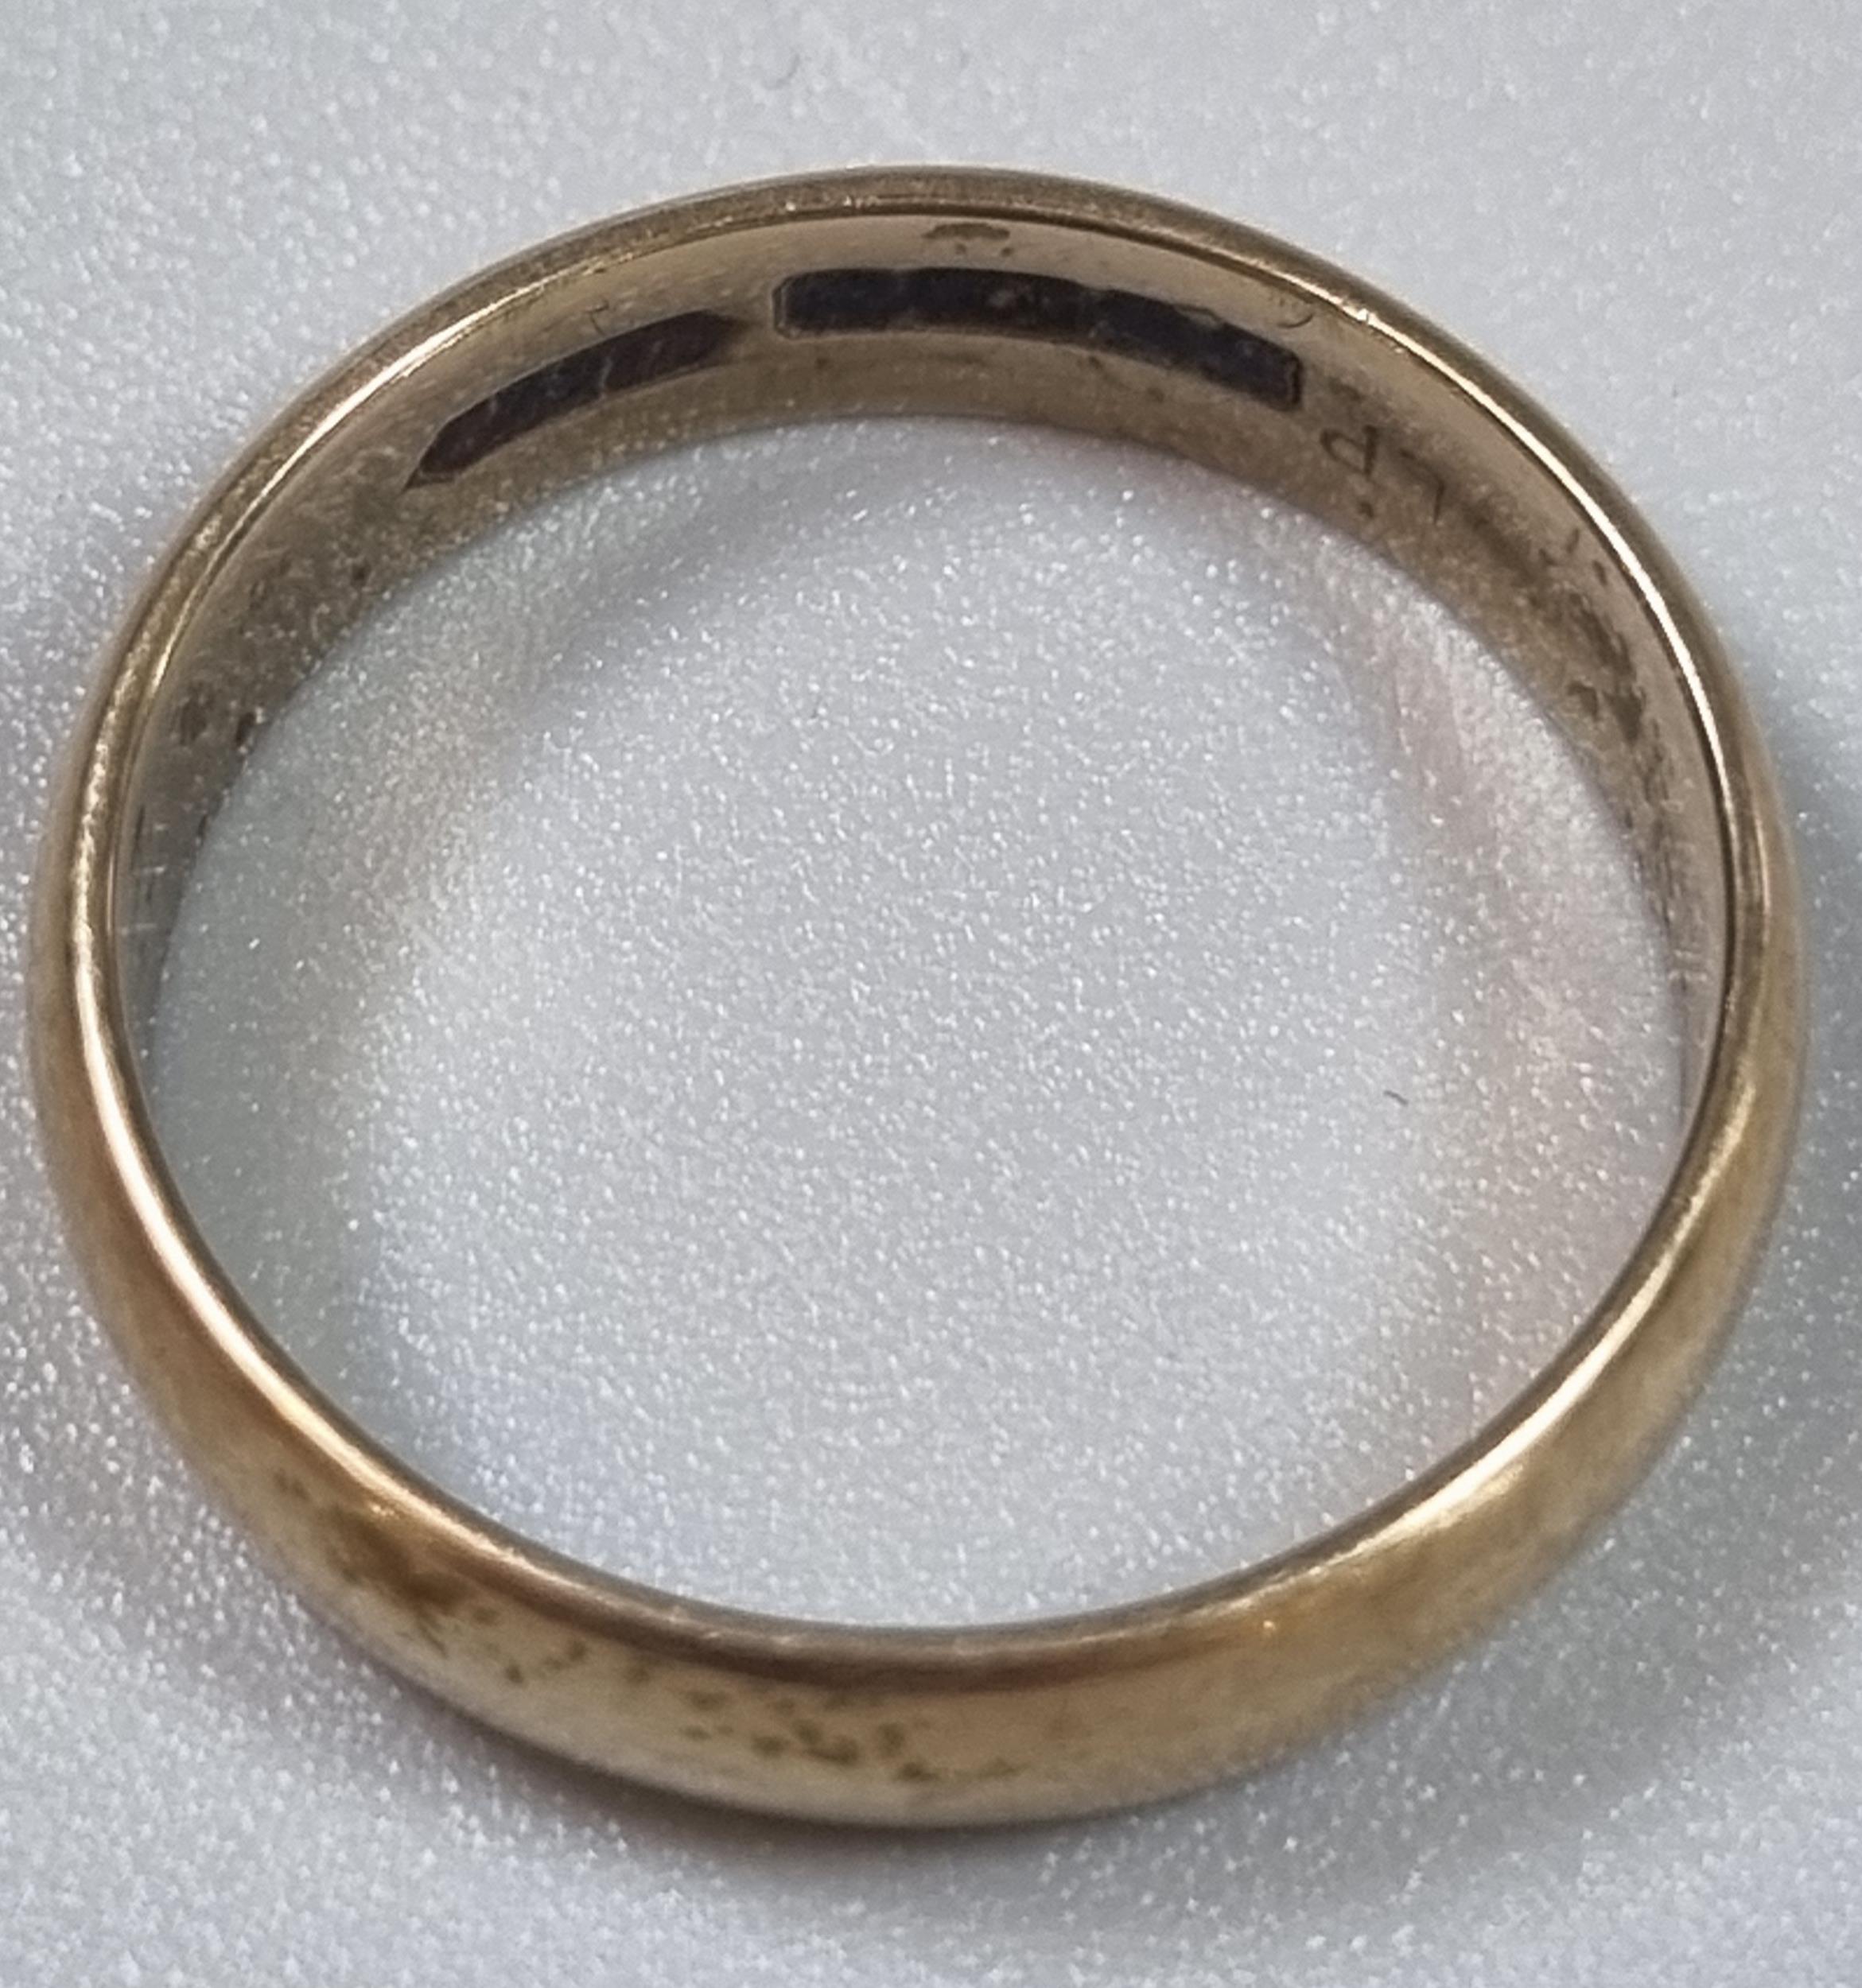 9ct gold wedding band. 2.8g approx. Size m1/2. (B.P. 21% + VAT) - Image 3 of 4